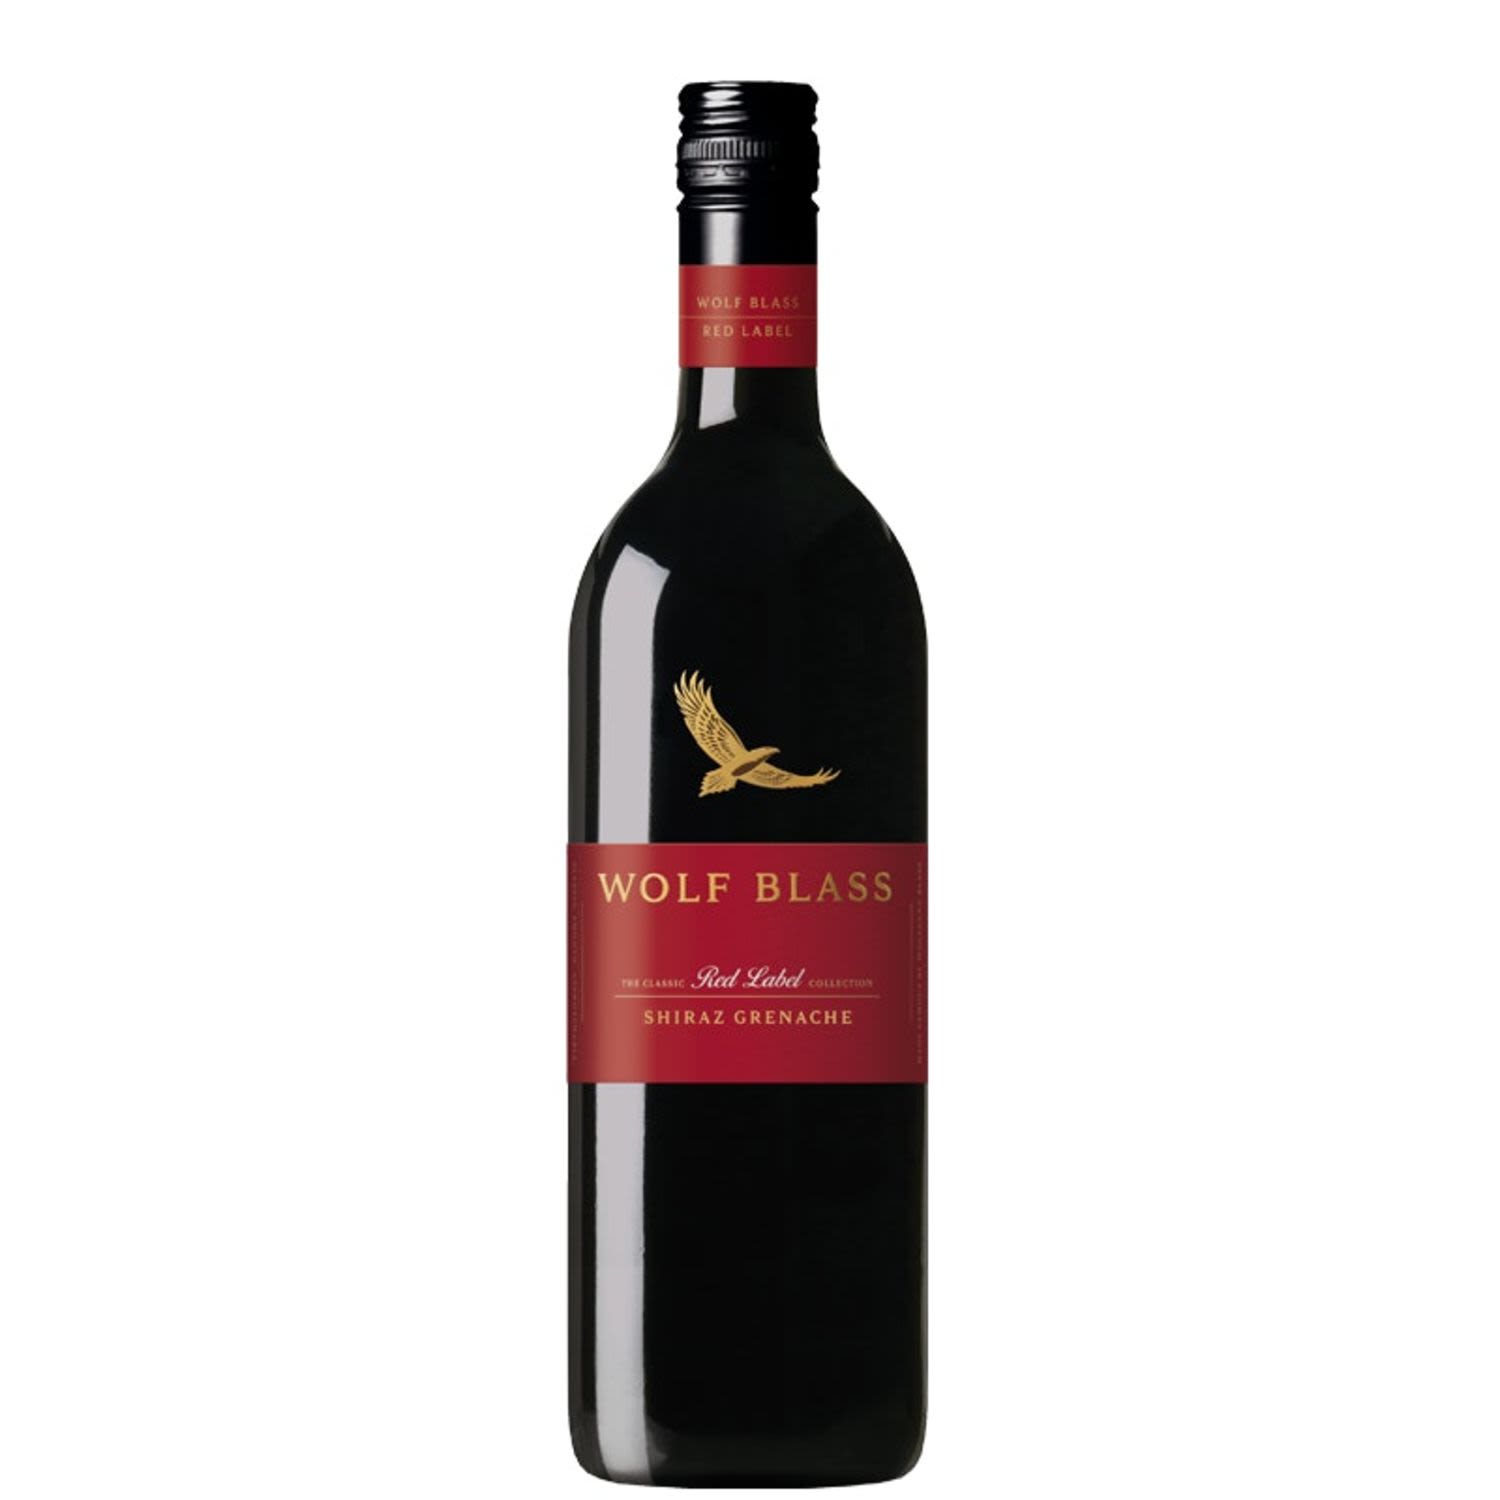 The nose shows fresh aromas of plums & berries with hints of spice & earth. This is a medium to full bodied wine that offers a sweet middle palate, finishing with a fine, smooth finish.<br /> <br />Alcohol Volume: 13.50%<br /><br />Pack Format: Bottle<br /><br />Standard Drinks: 8</br /><br />Pack Type: Bottle<br /><br />Country of Origin: Australia<br /><br />Region: South Eastern Australia<br /><br />Vintage: '2013<br />